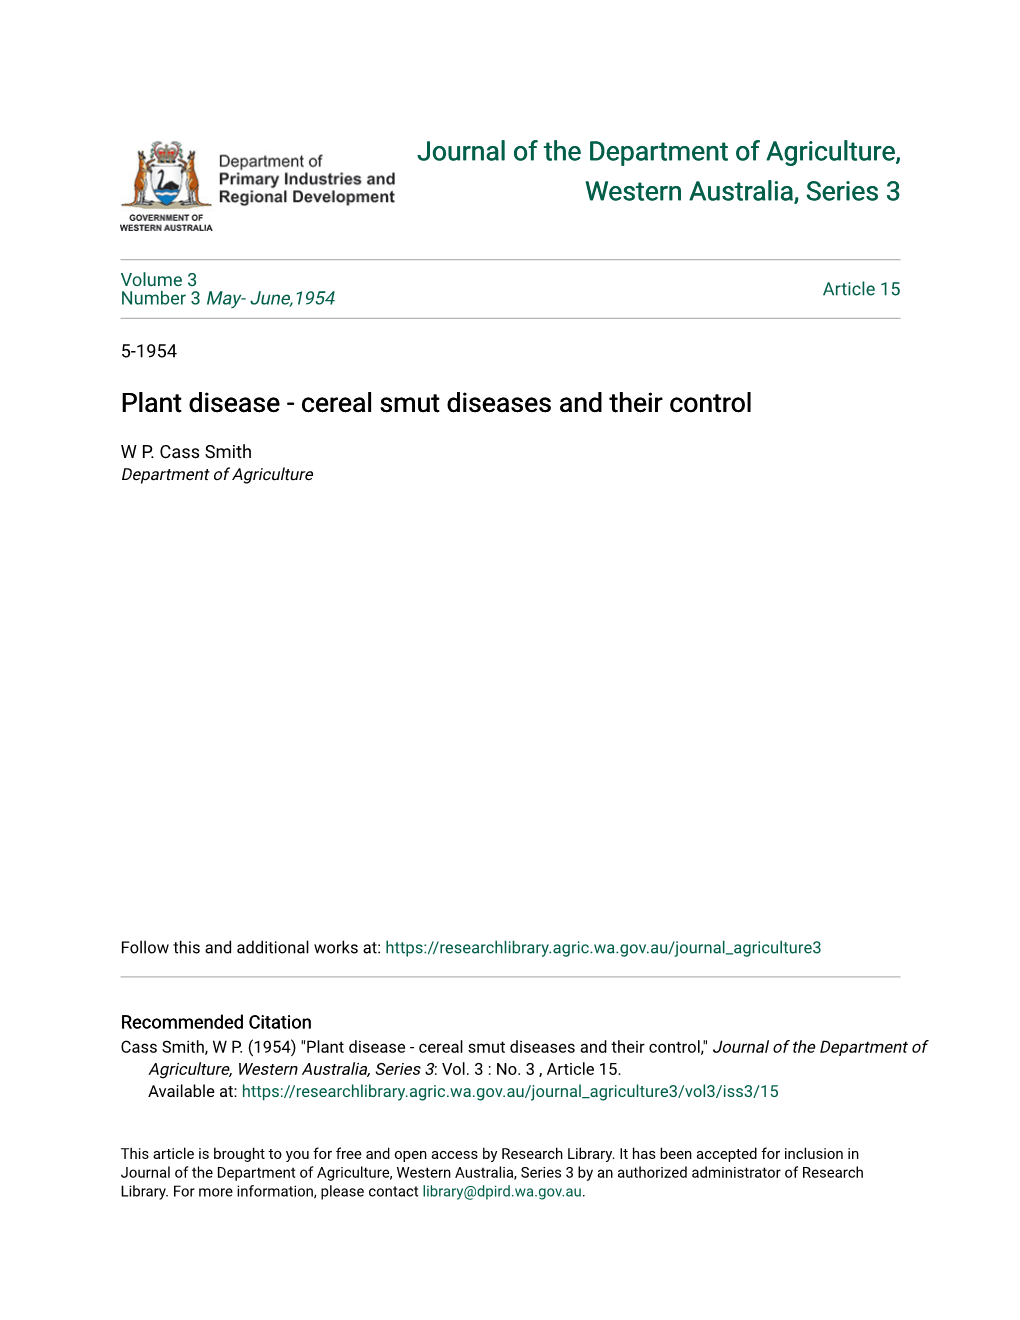 Plant Disease - Cereal Smut Diseases and Their Control